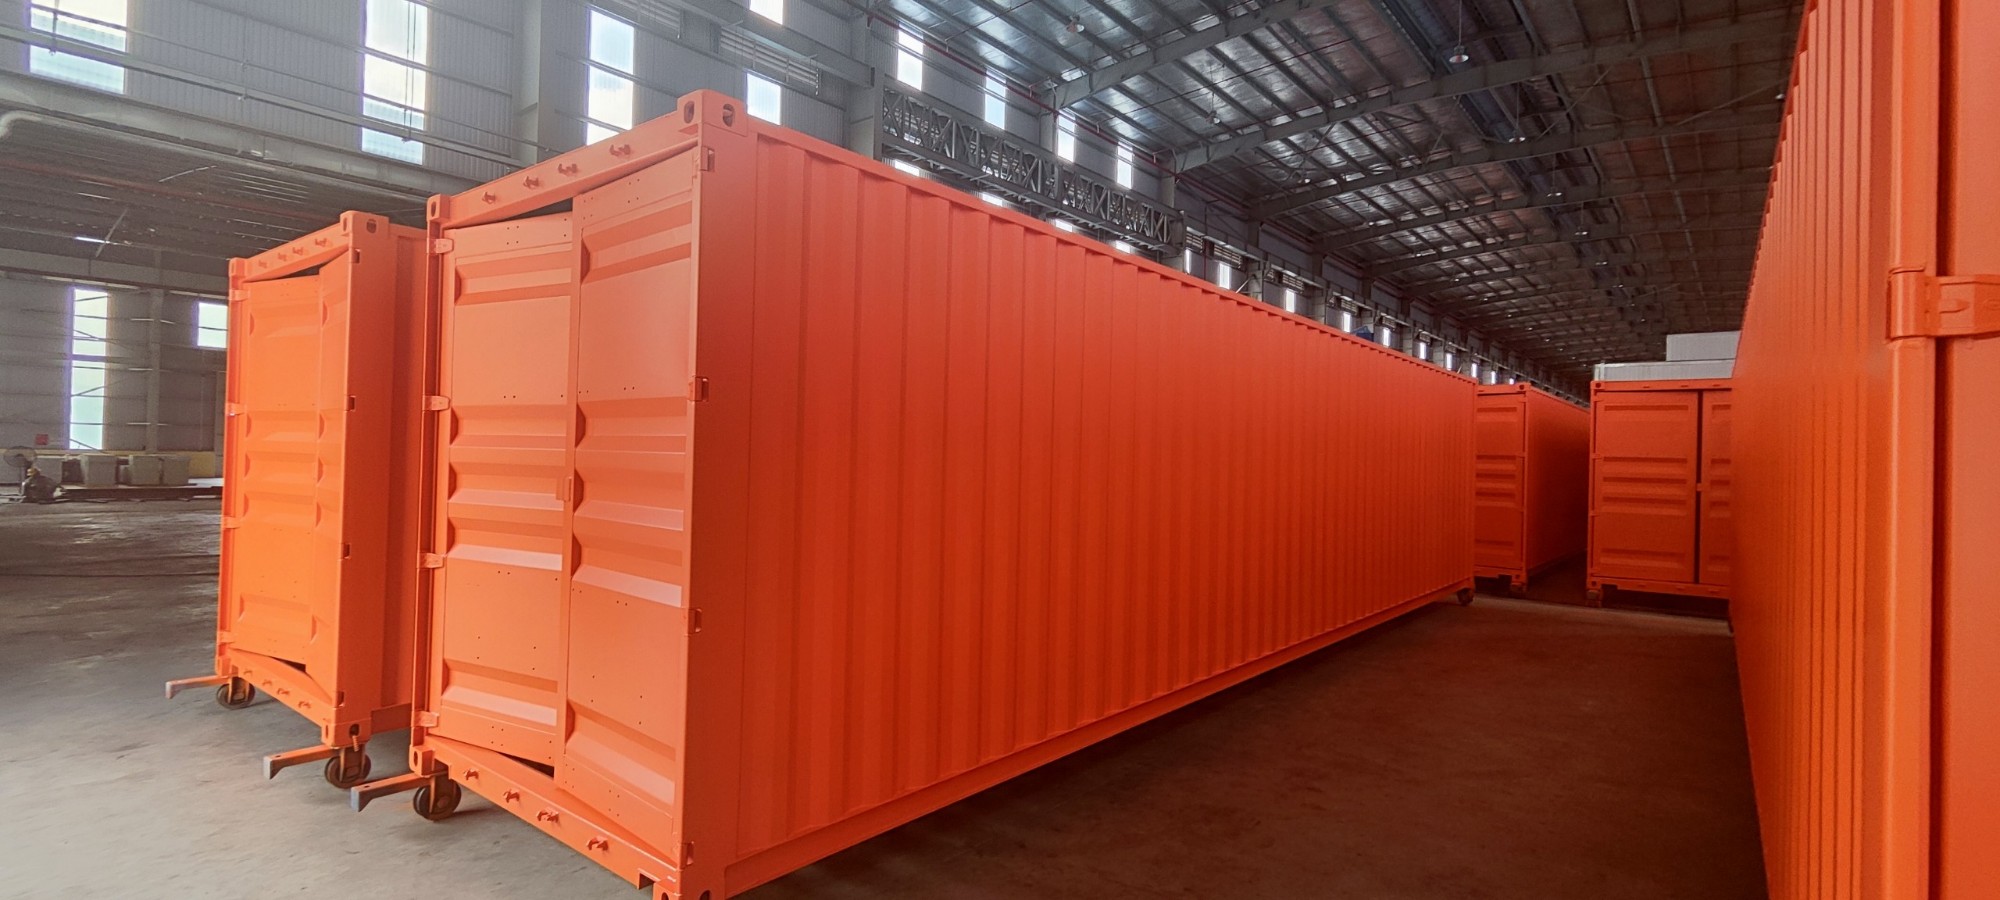 Dây chuyền sản xuất Container